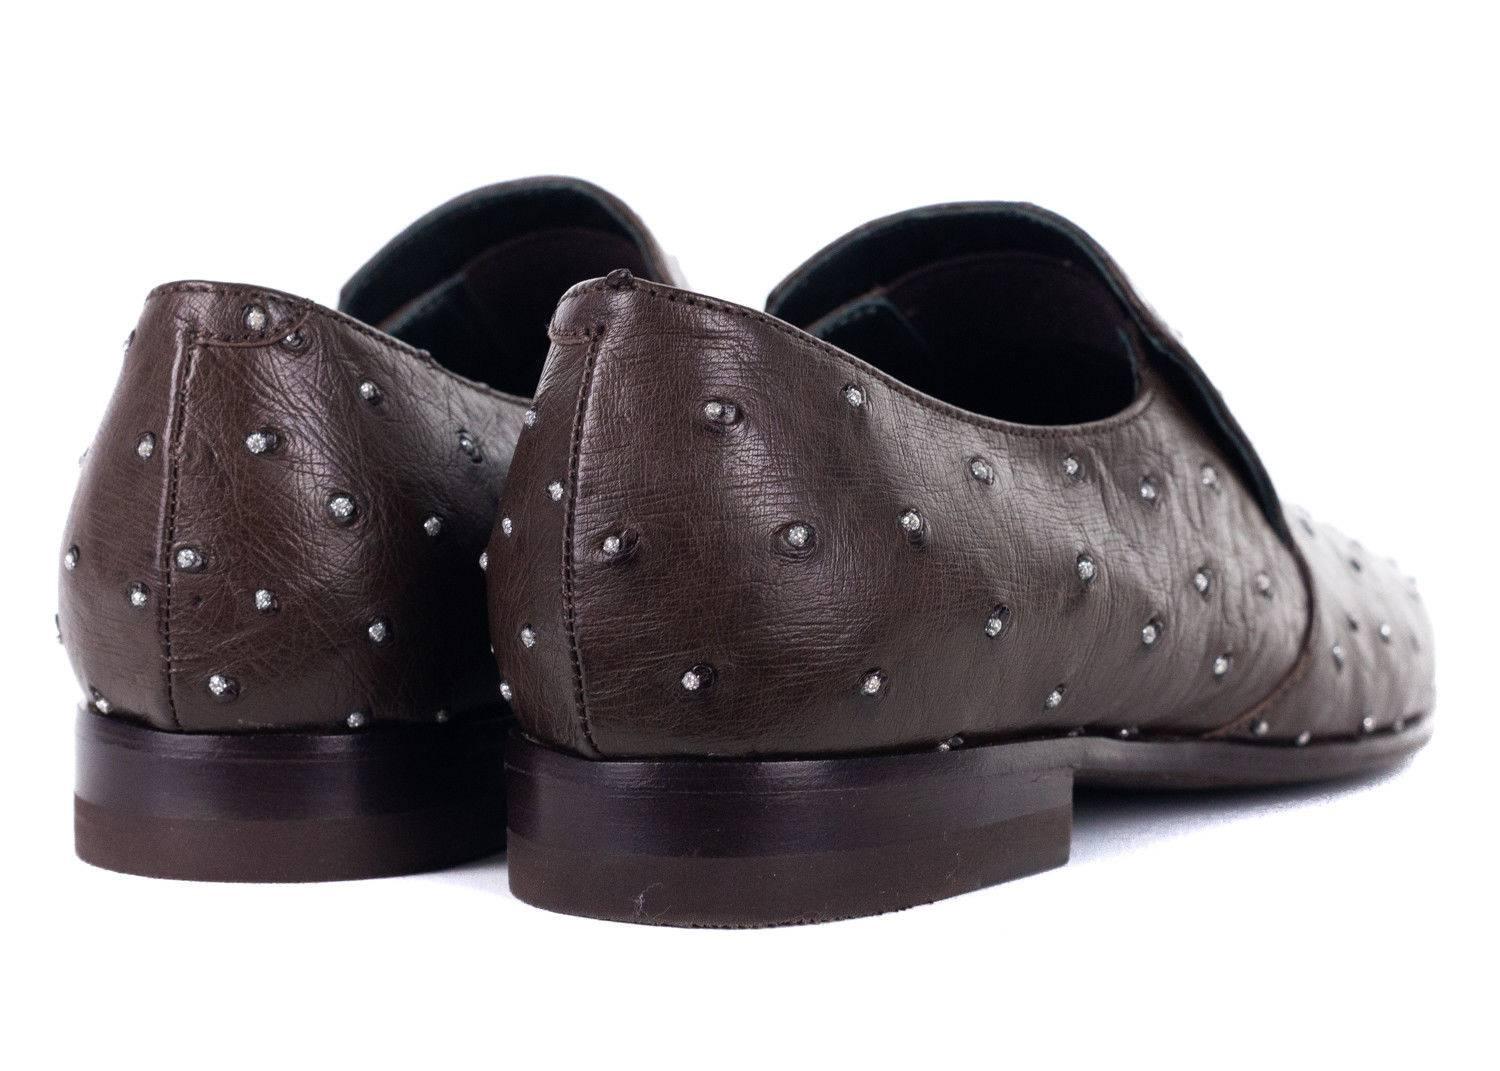 Brunello Cucinelli's Stone Studded Slip ons are perfect on hand pair for that special occasion. These shoes feature a uniform all over stone studded theme, crinkled leather, and easy slip on silhouette. You can pair this shoe with slacks, or cream